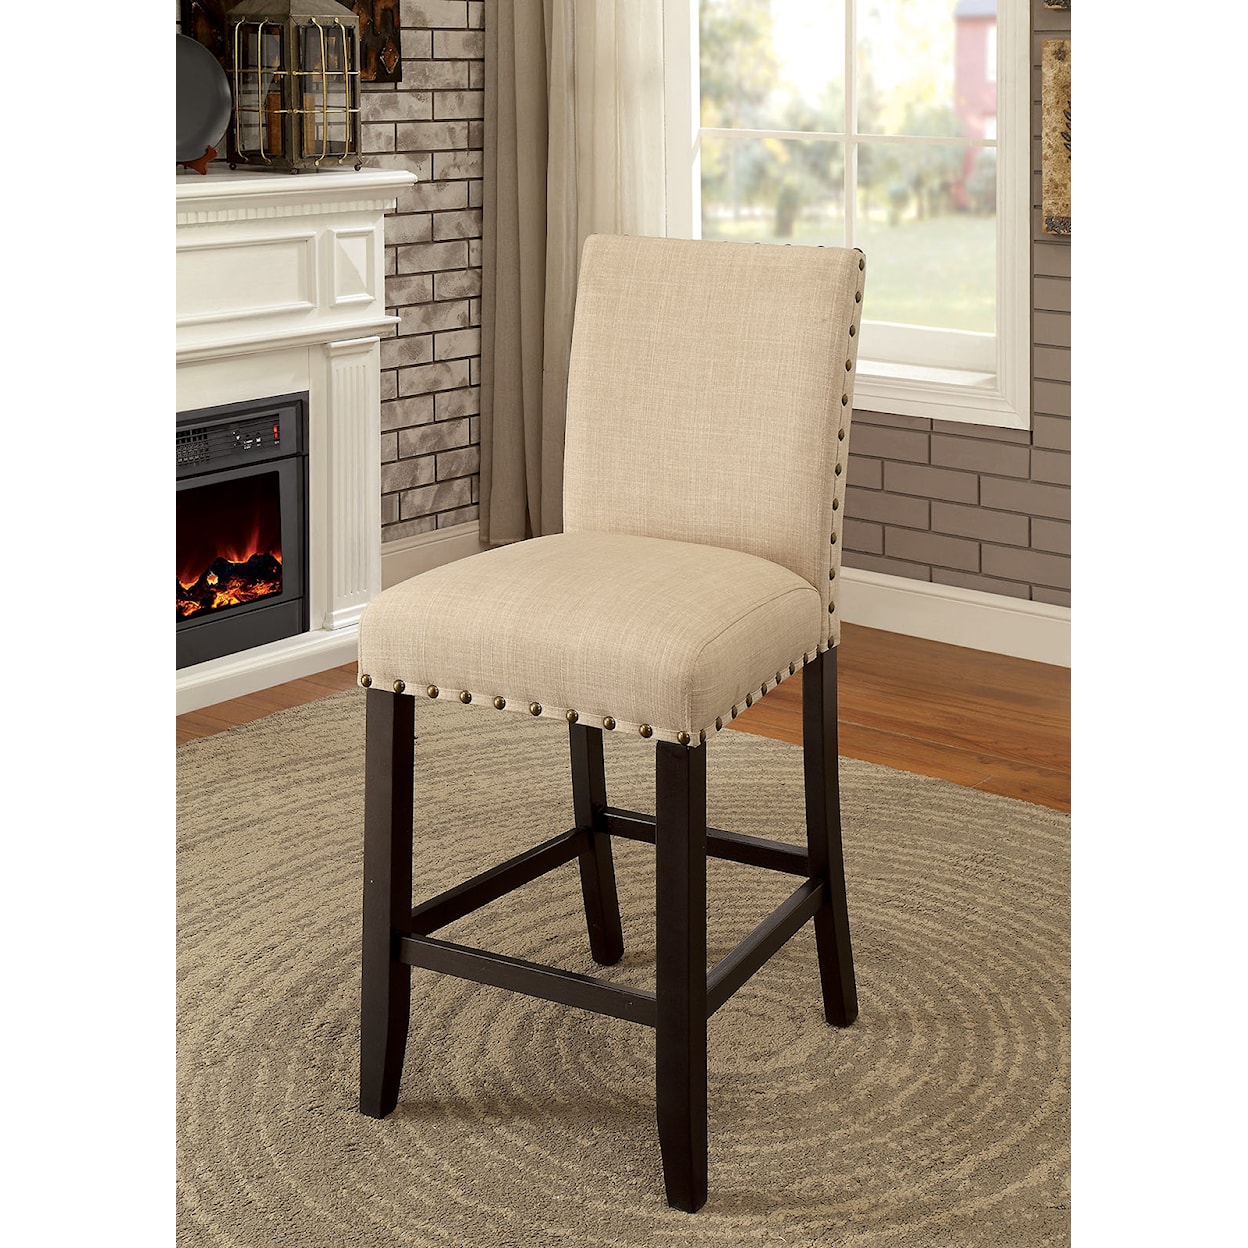 FUSA Kaitlin Set of 2 Counter Height Chairs